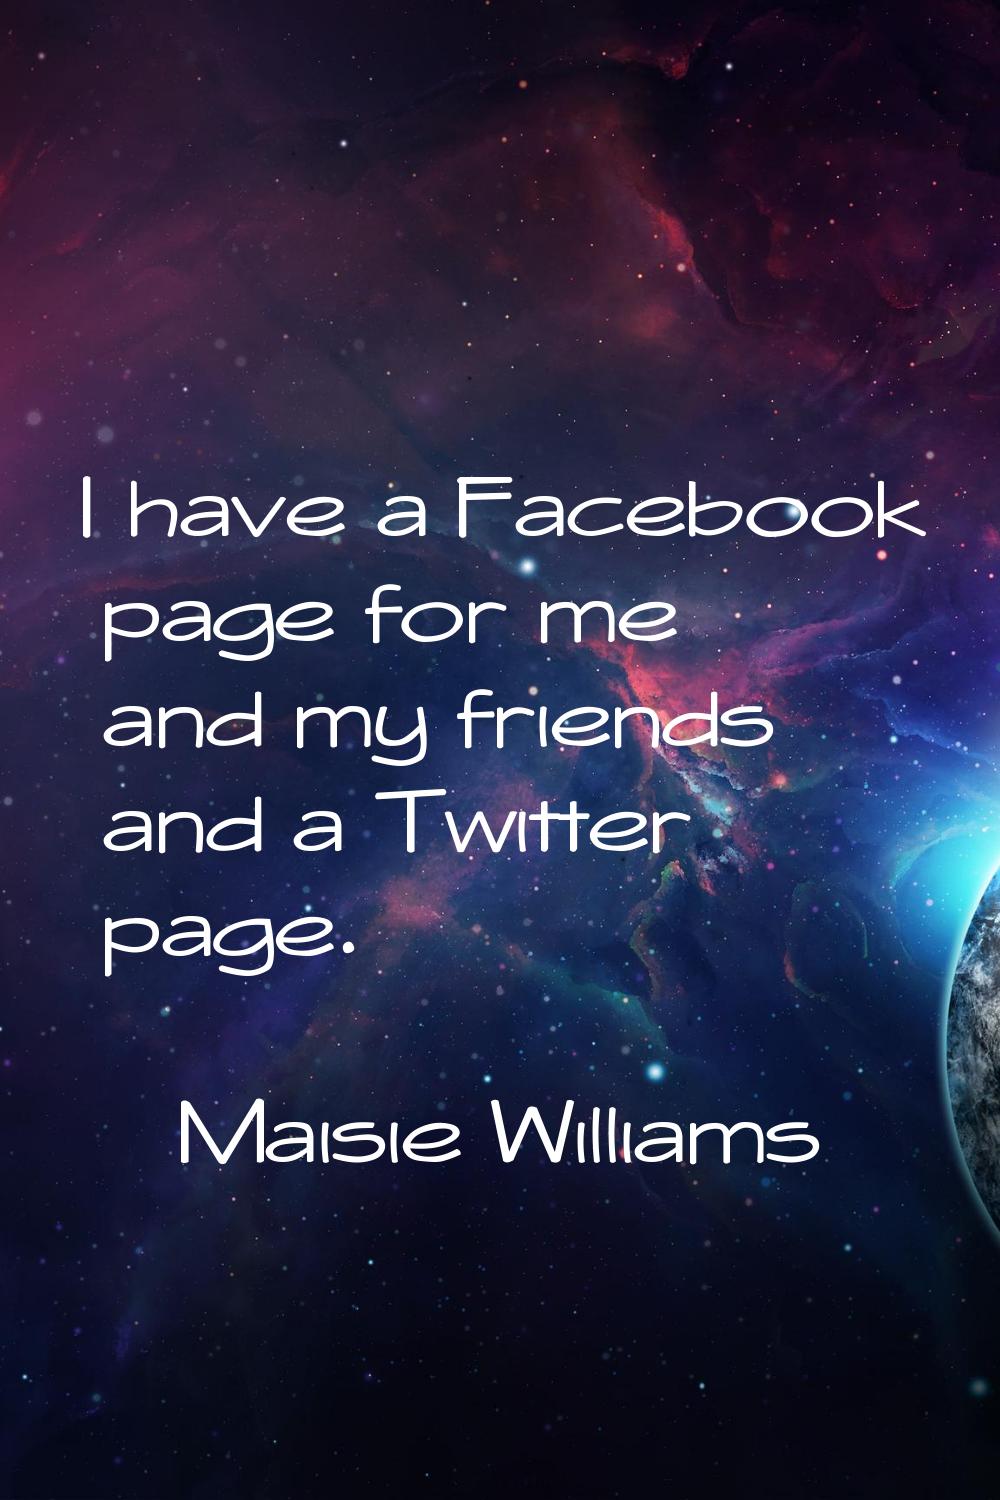 I have a Facebook page for me and my friends and a Twitter page.